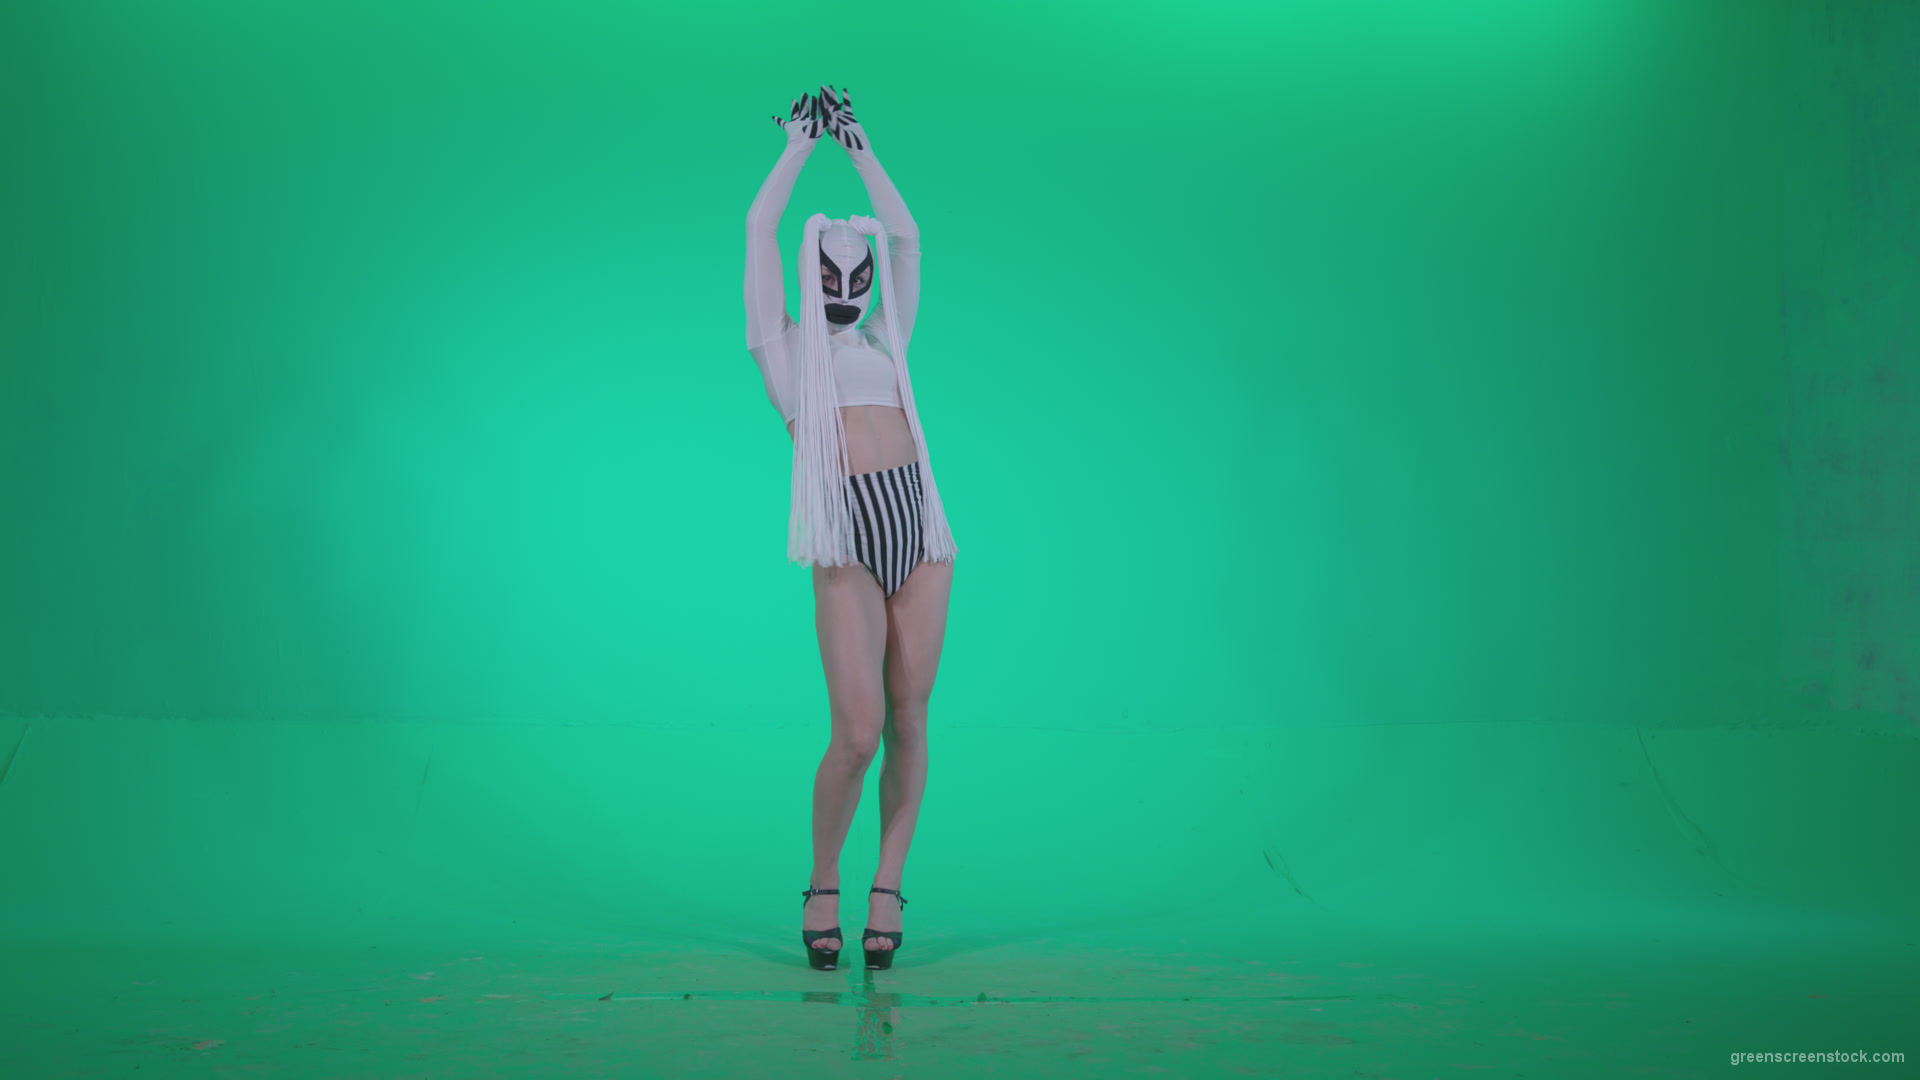 Go-go-Dancer-with-Latex-Top-t1-Green-Screen-Video-Footage_001 Green Screen Stock